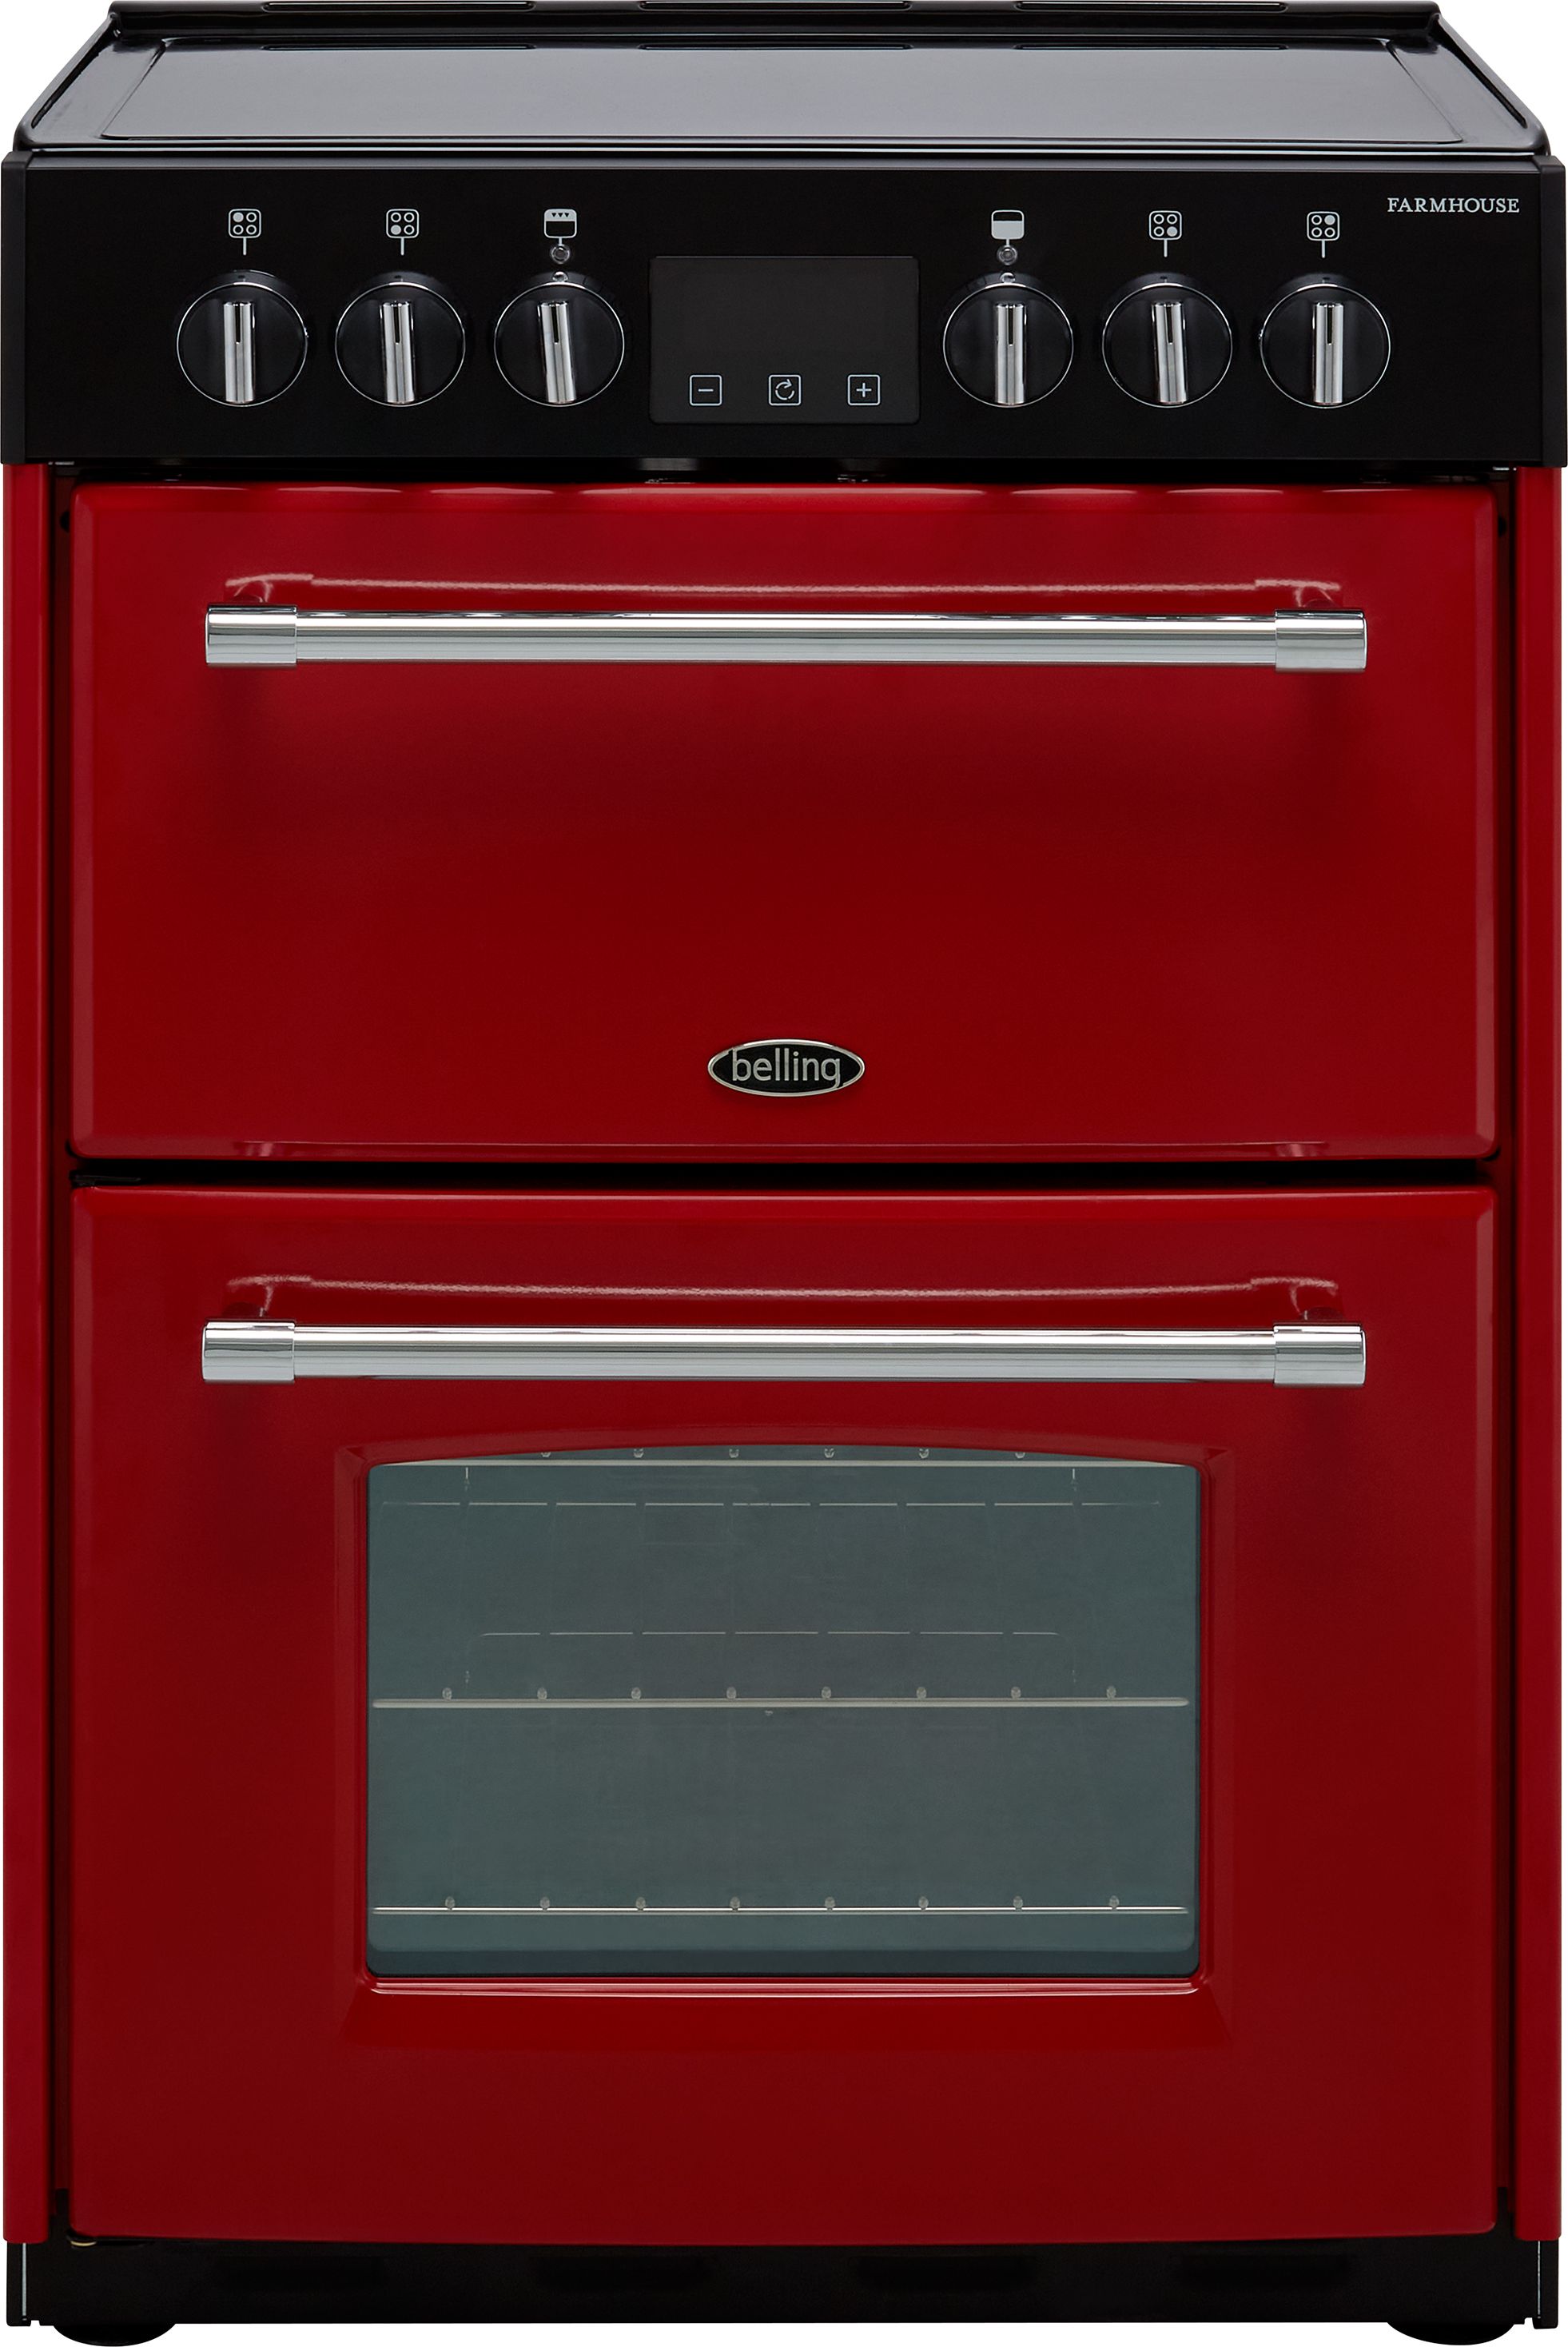 Belling Farmhouse60E 60cm Electric Cooker with Ceramic Hob - Hot Jalapeno - A/A Rated, Red